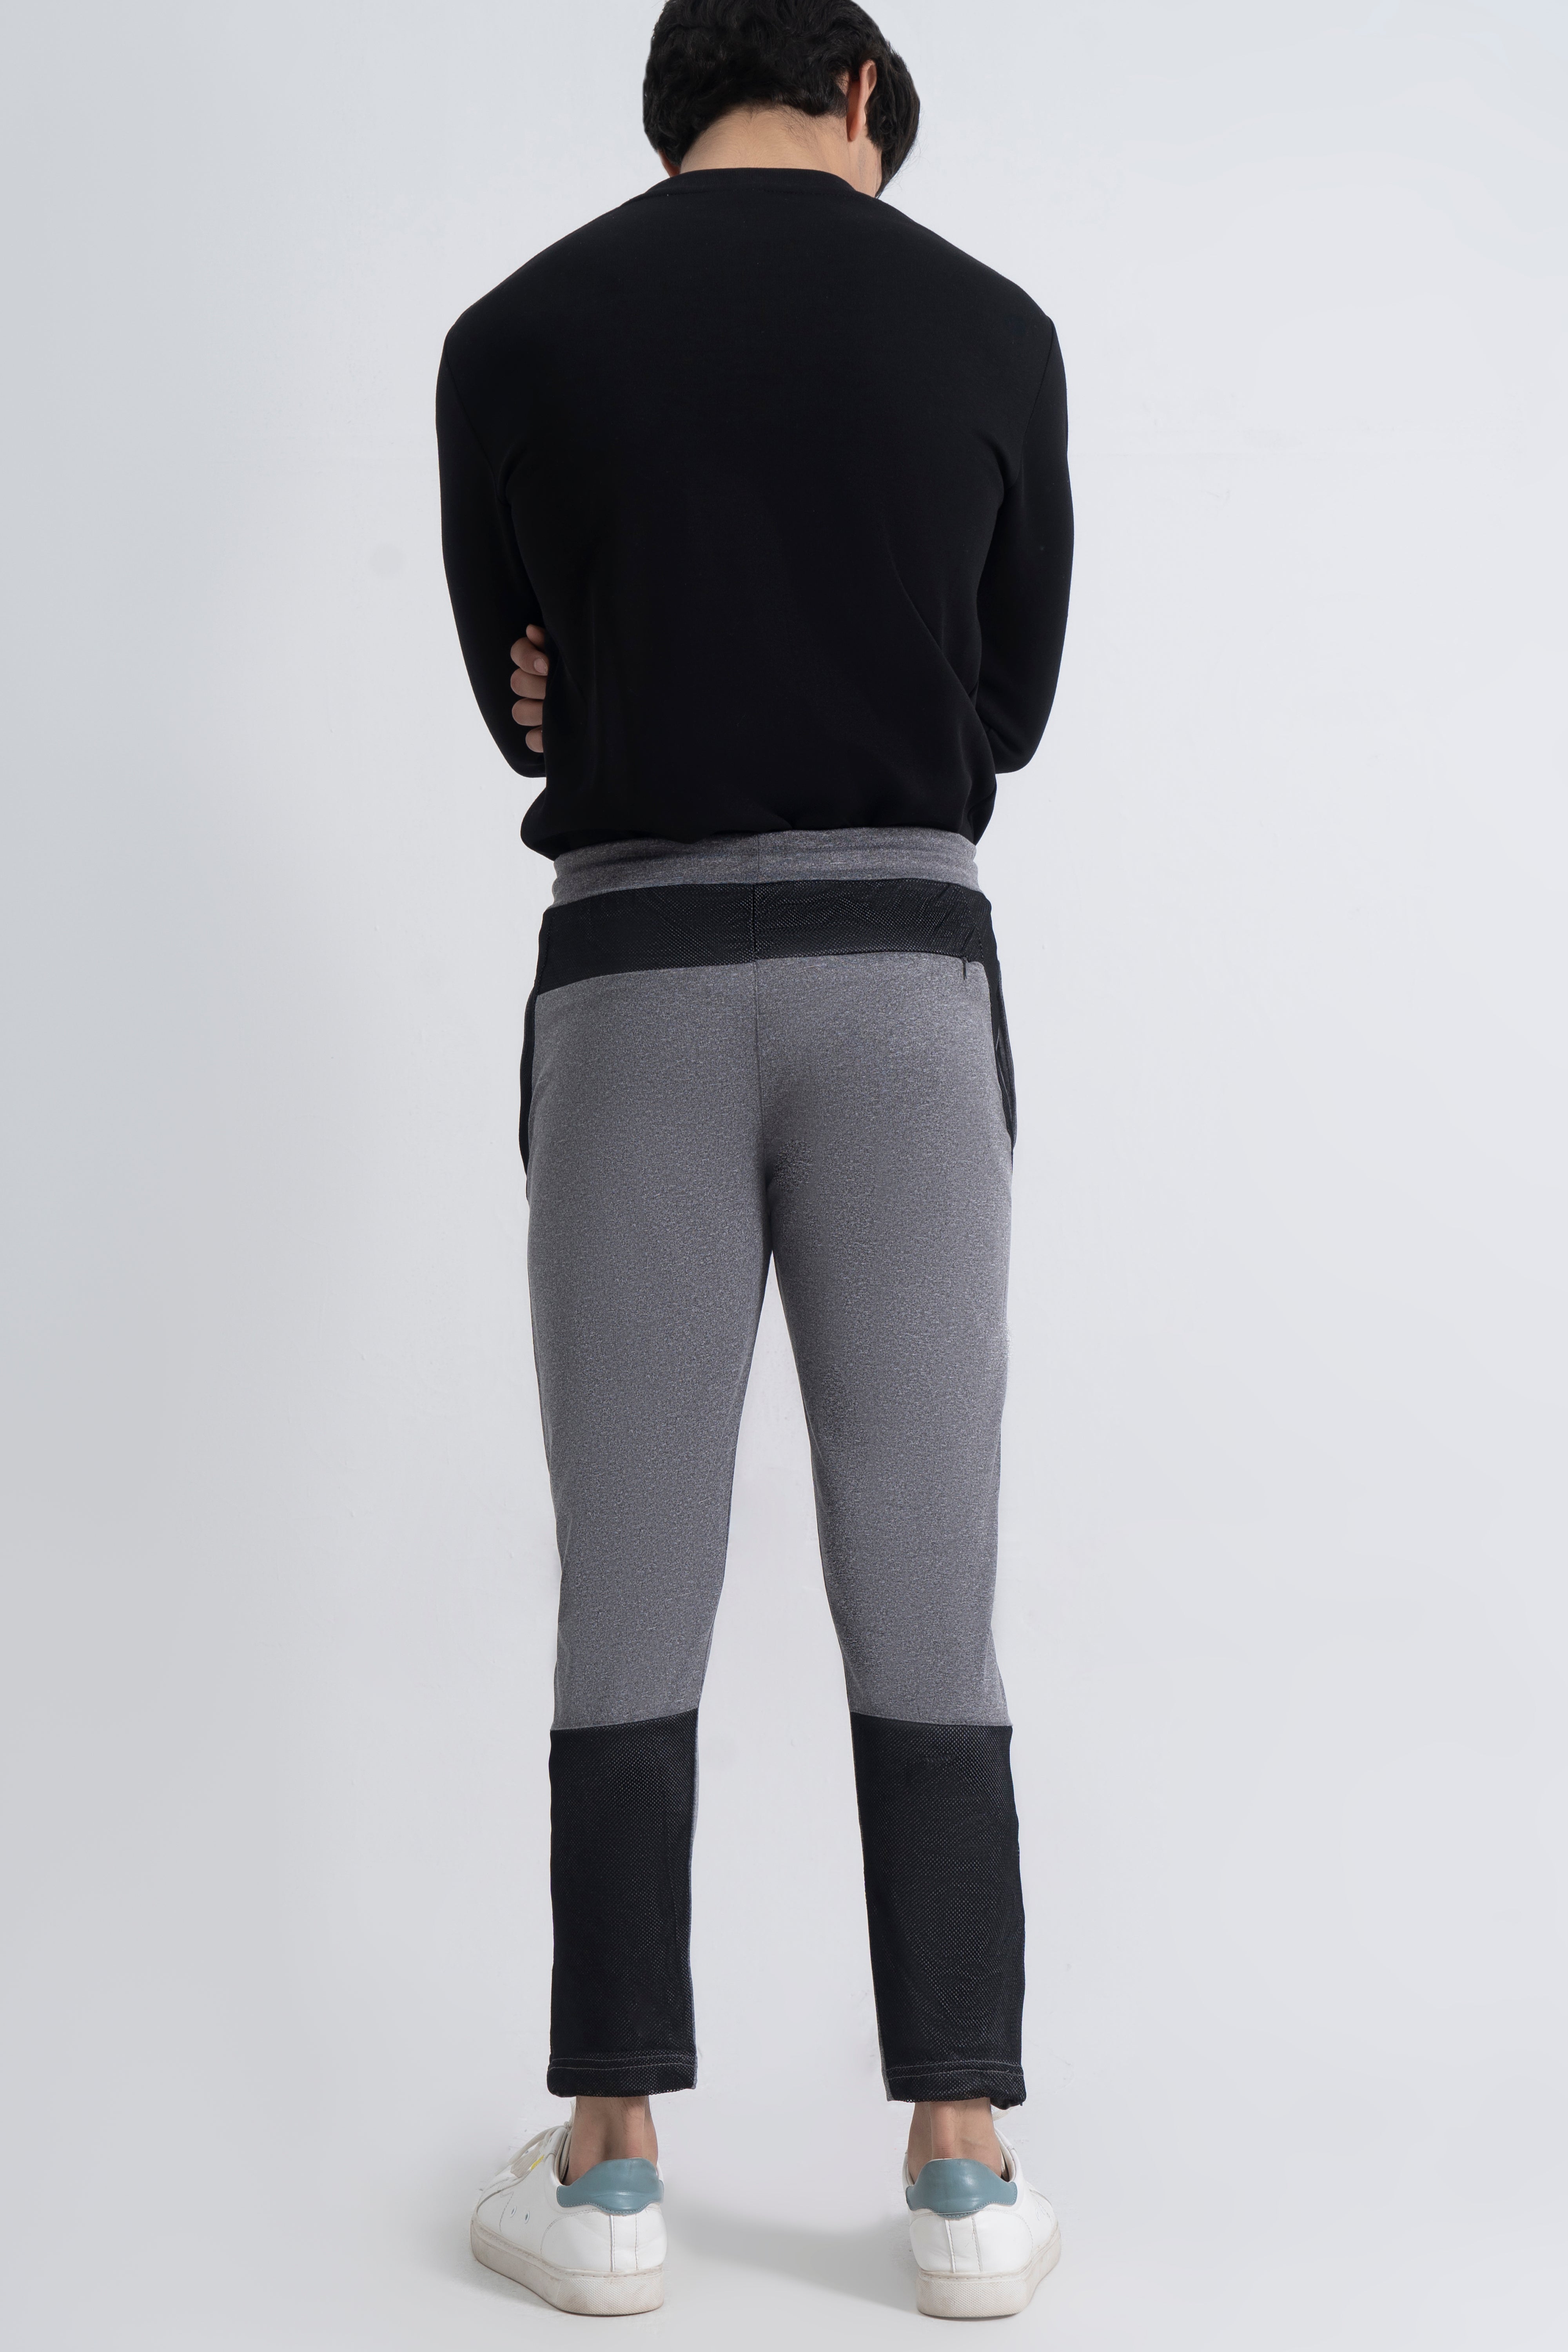 Grey Dry Fit Trousers